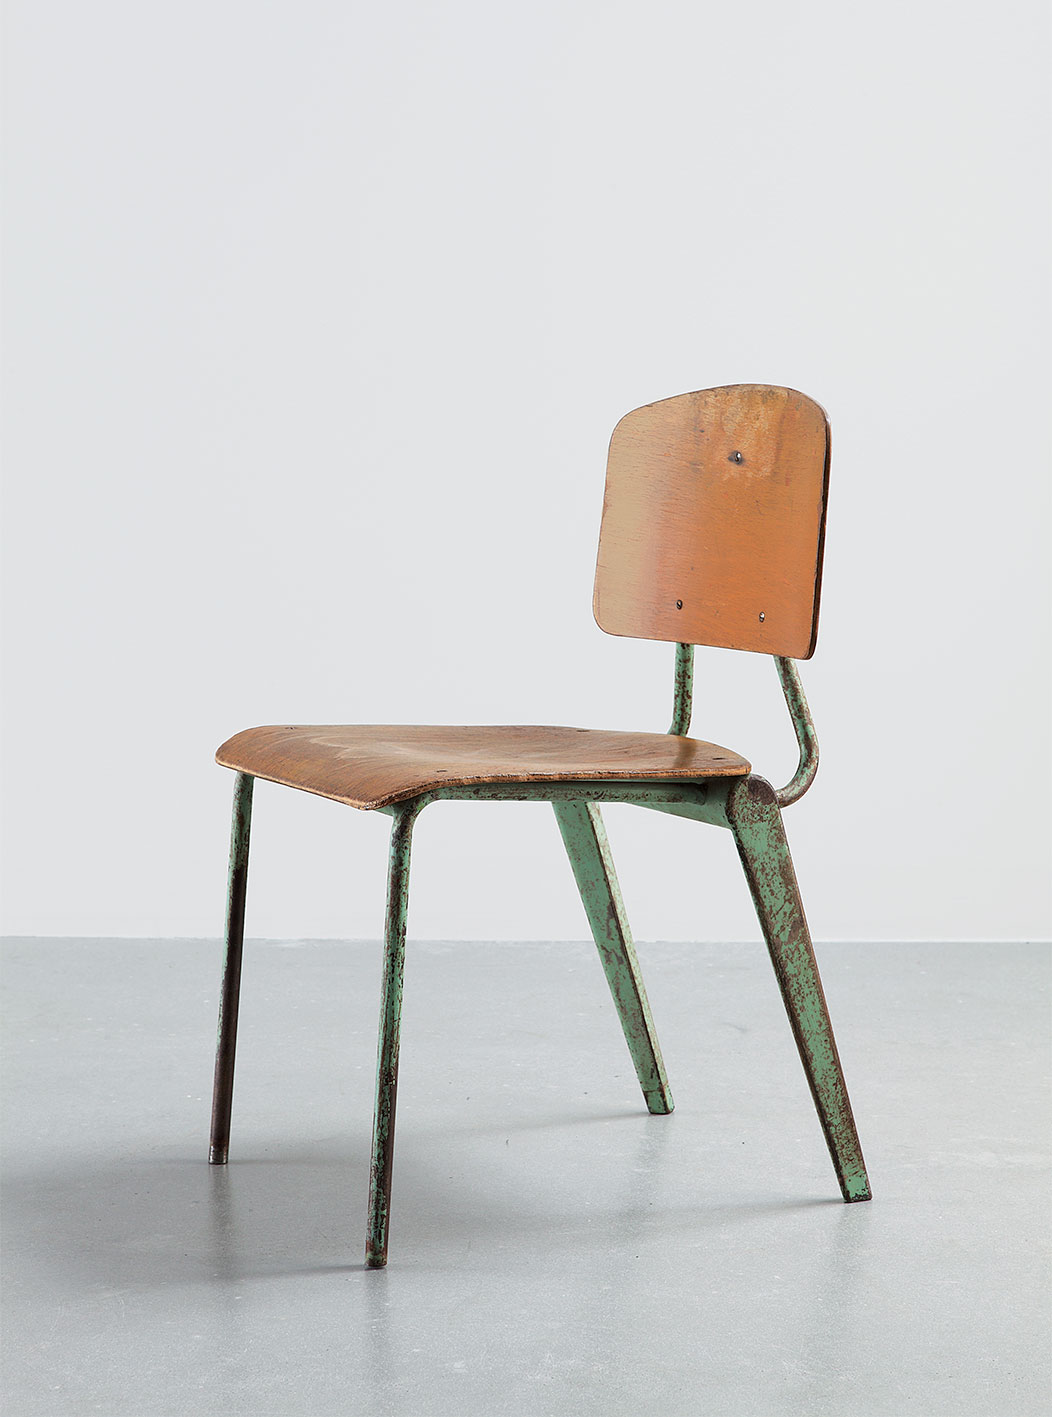 Chair no. 805, 1951.